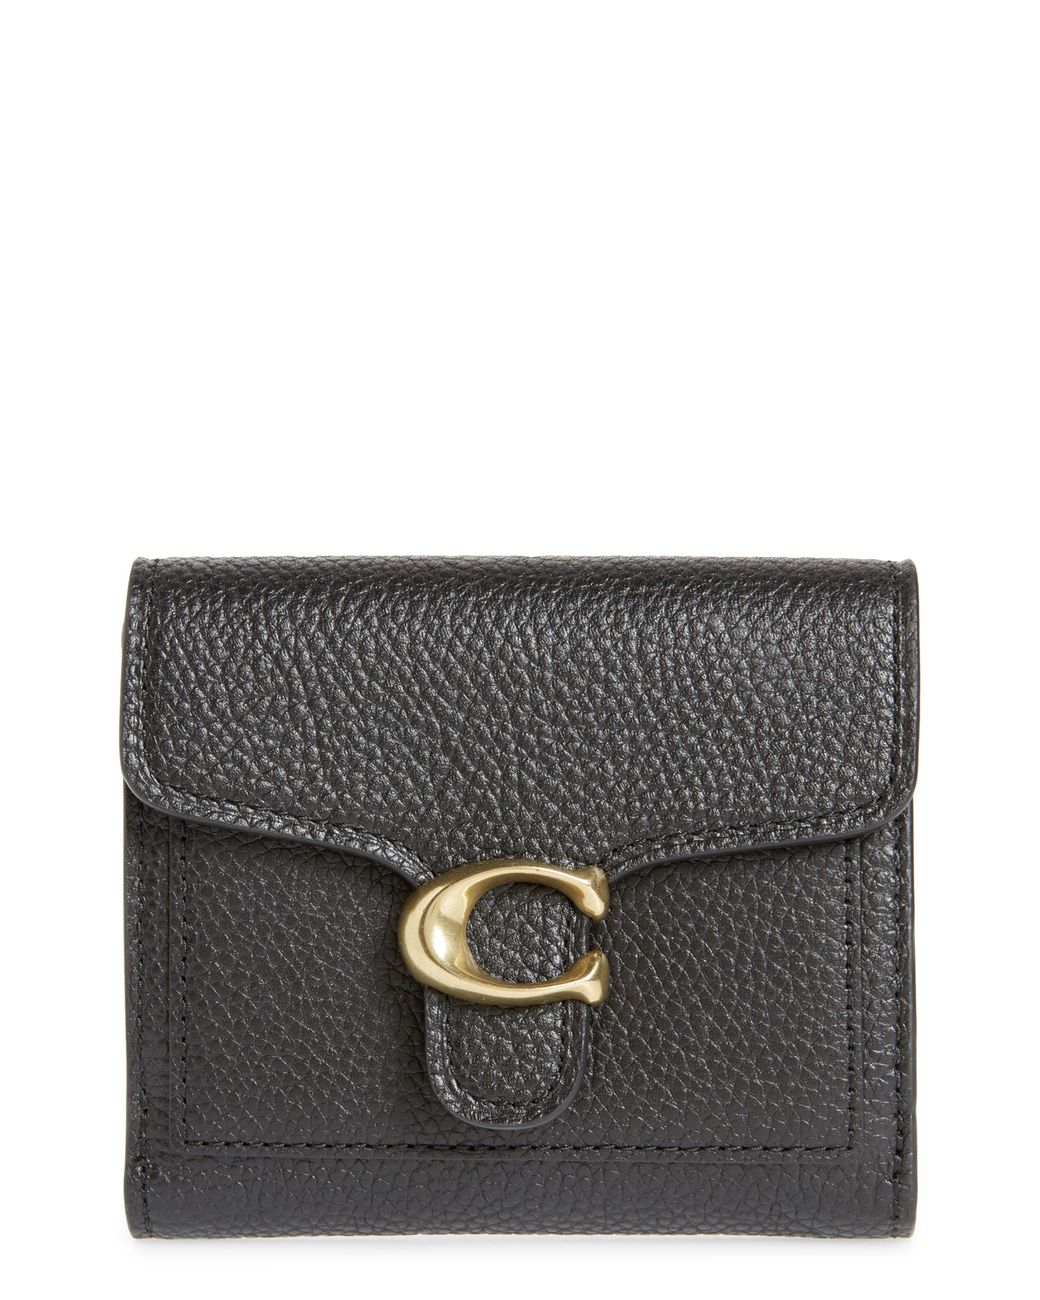 COACH Small Tabby Leather Wallet - Lyst